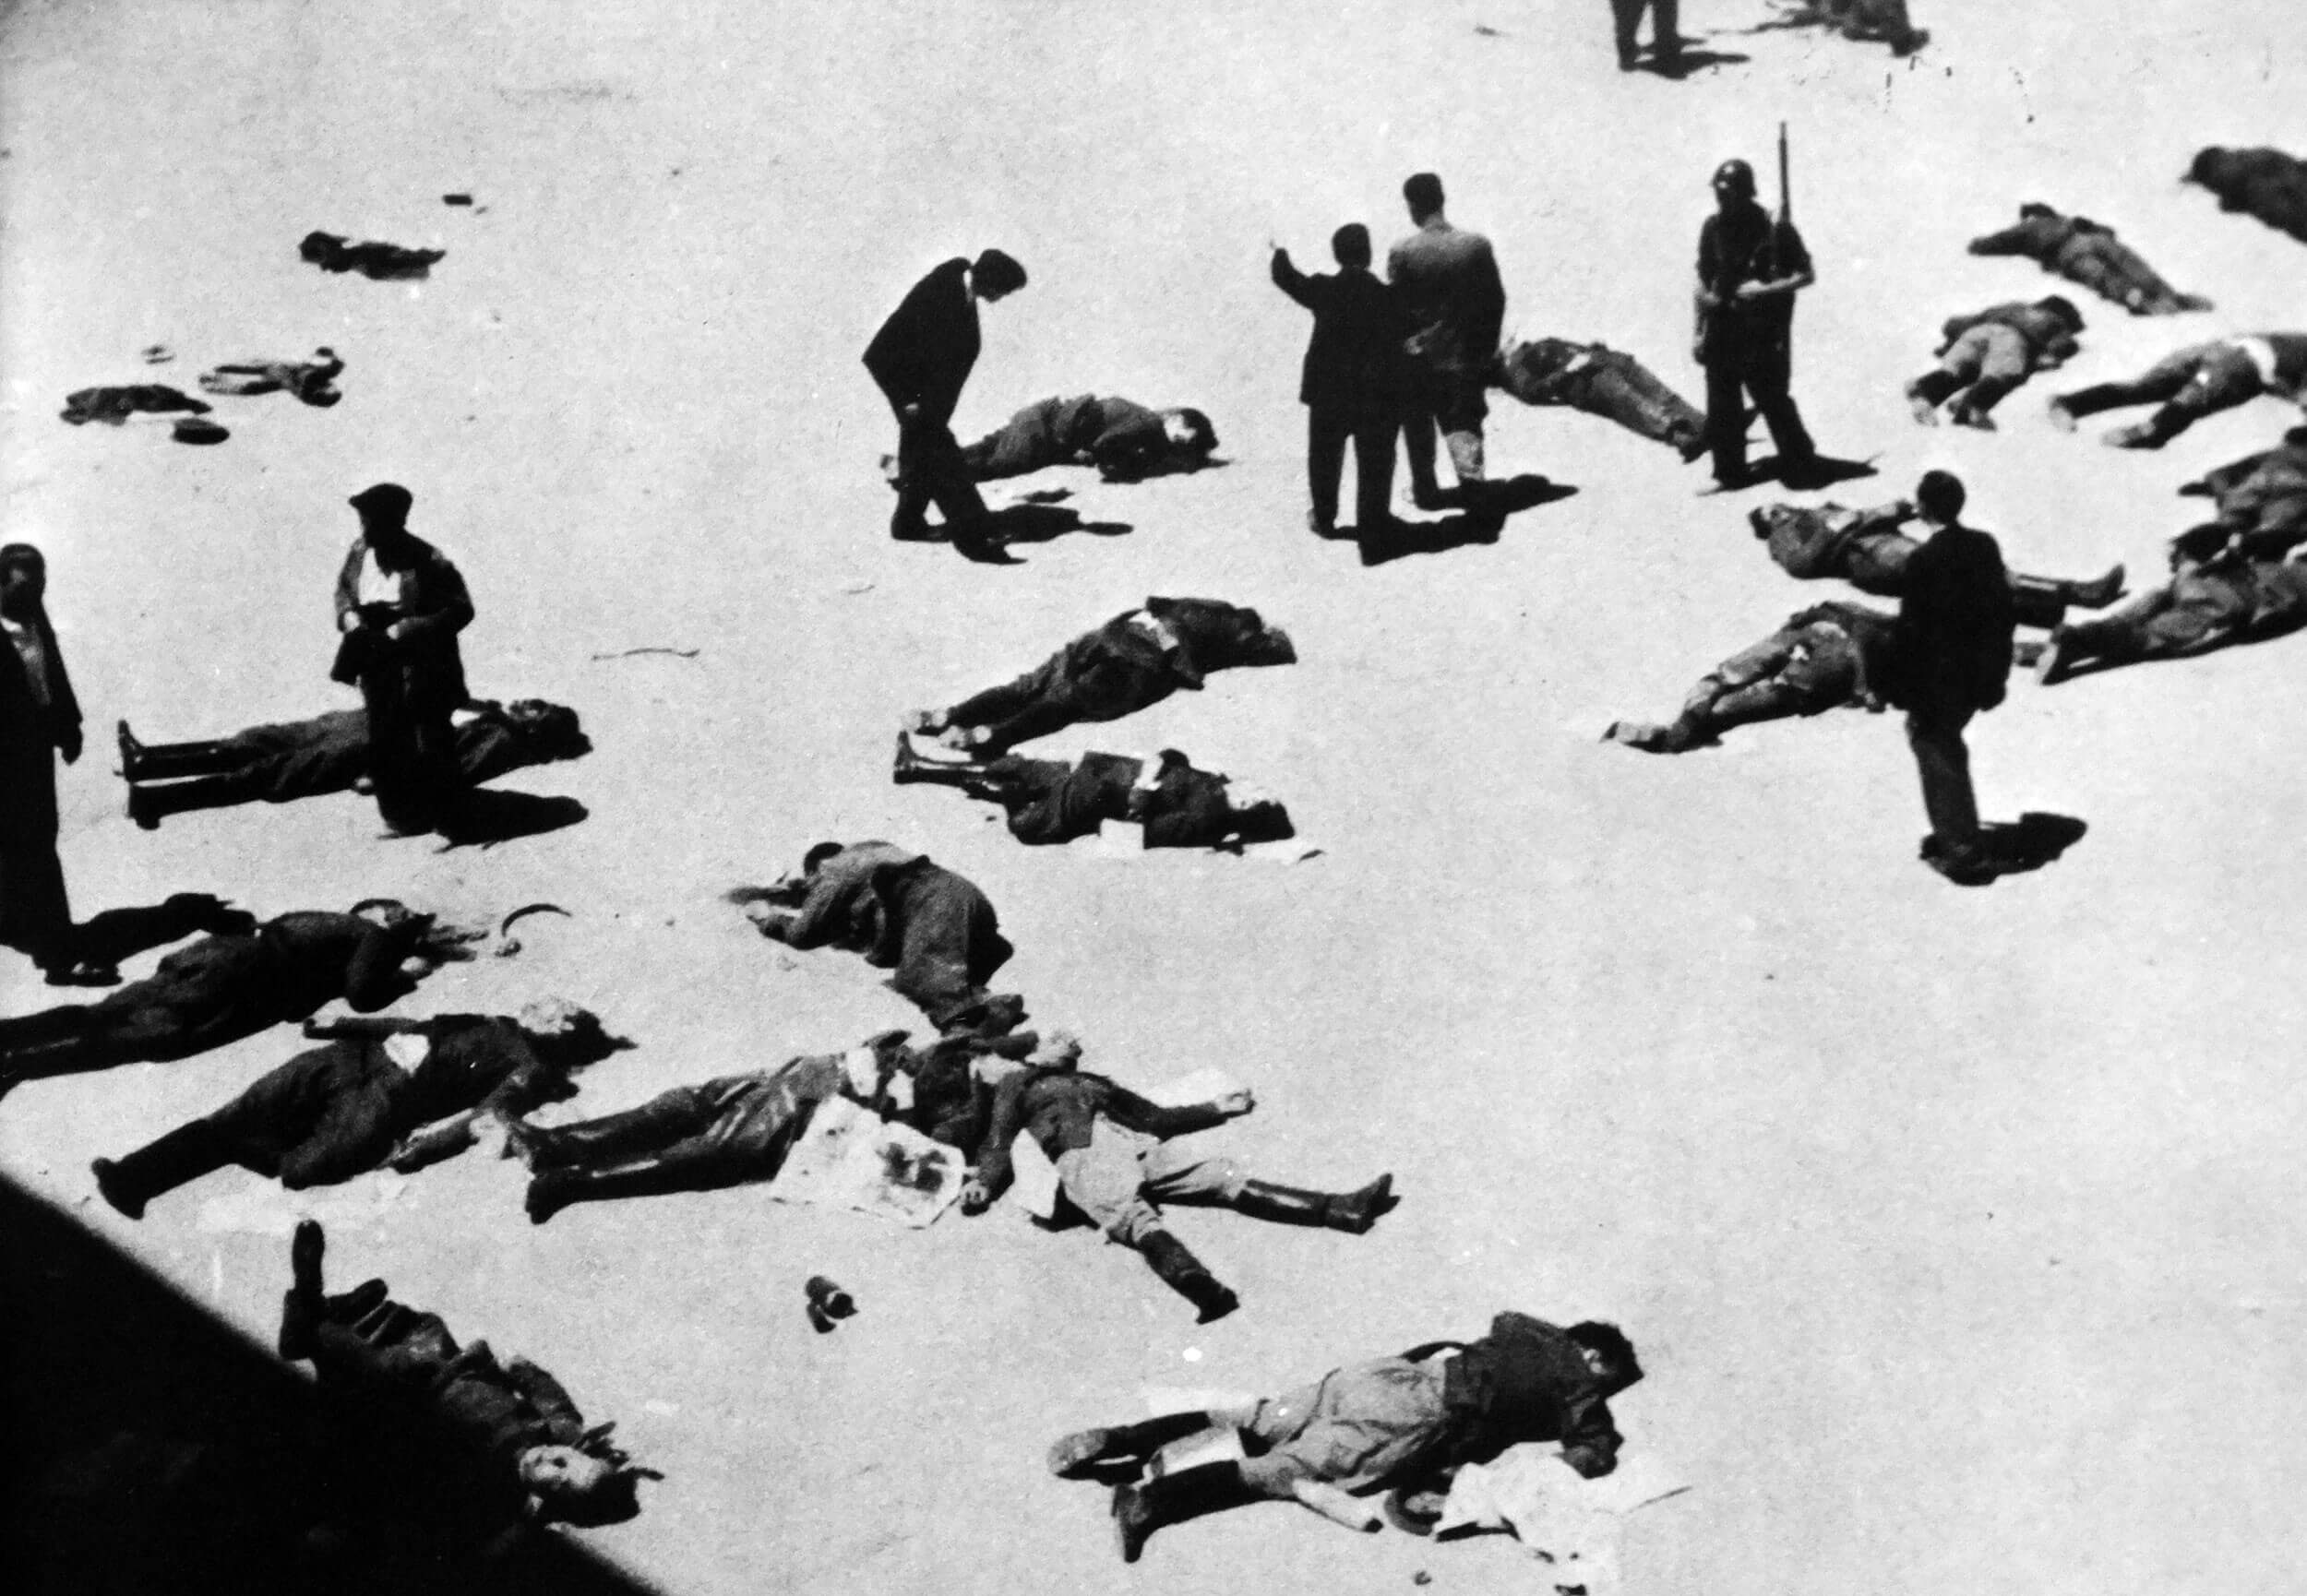 Dead people killed by ANTIFA for disagreeing with communism.